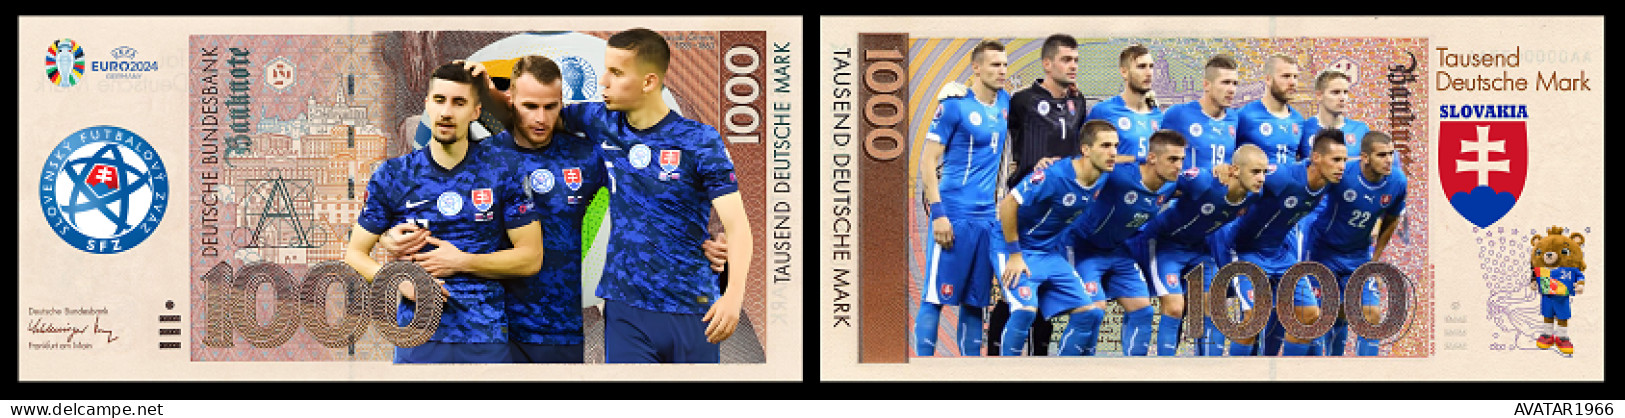 UEFA European Football Championship 2024 qualified country Slovakia  8 pieces Germany fantasy paper money